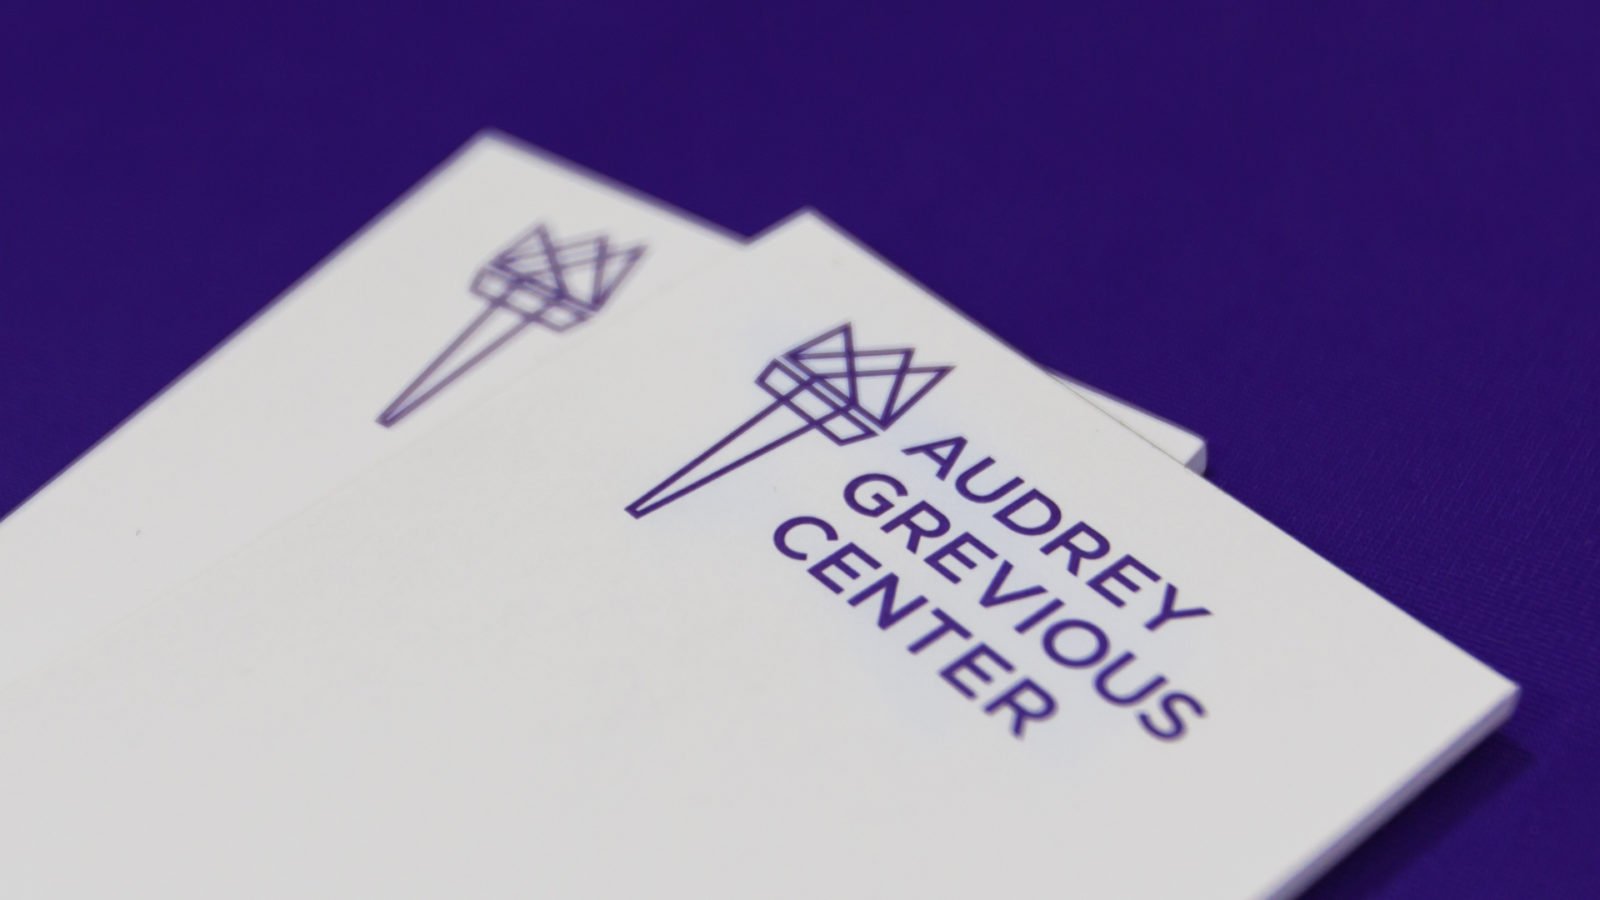 Stationery for the Audrey Grevious Center School